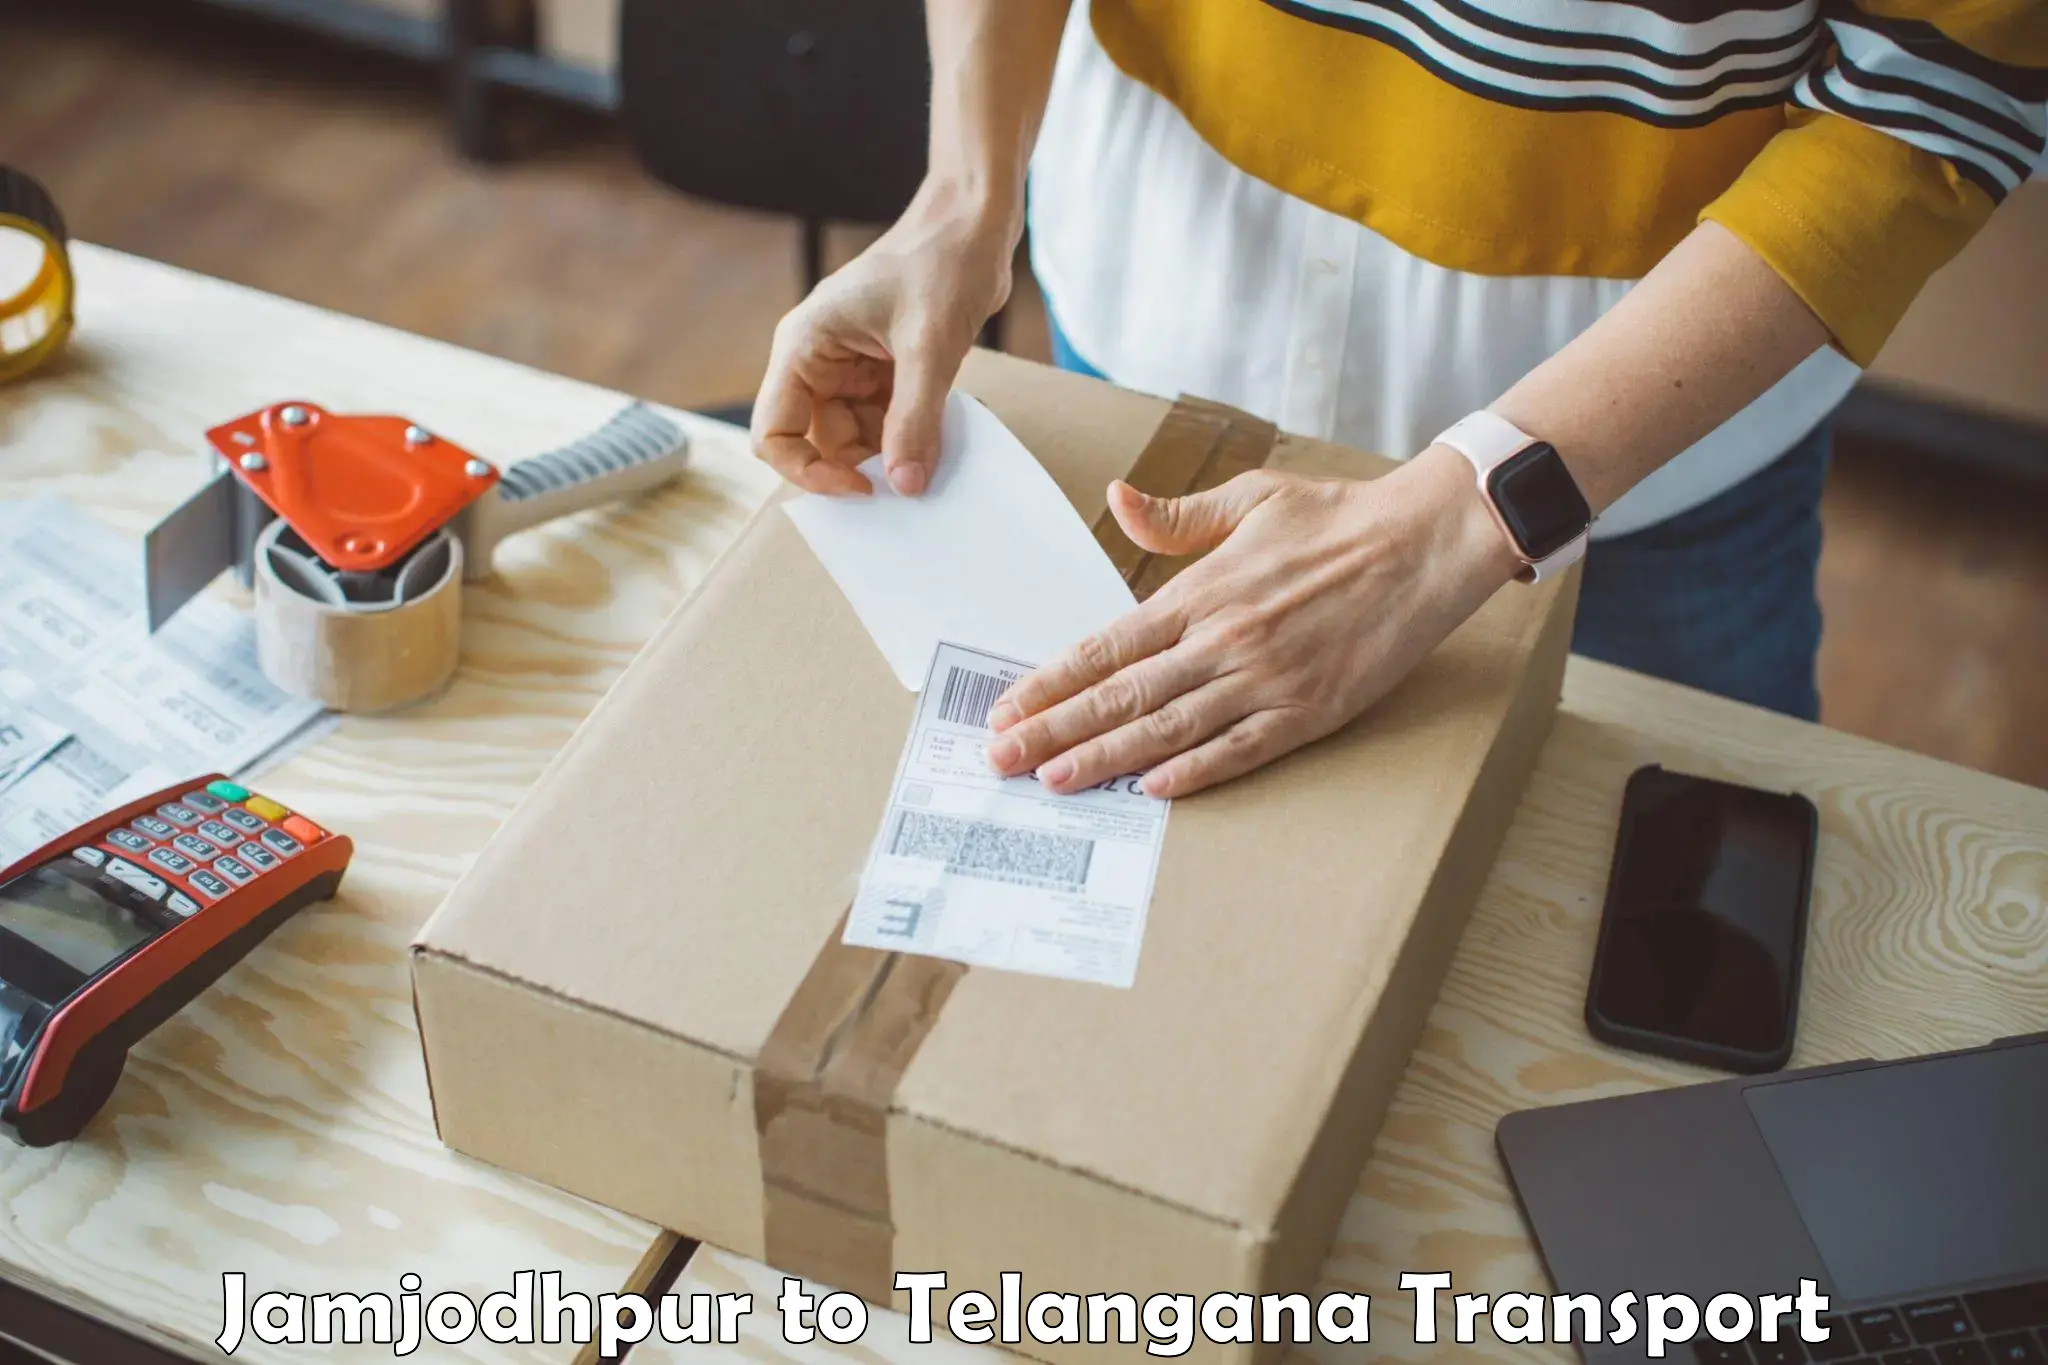 Express transport services in Jamjodhpur to IIT Hyderabad